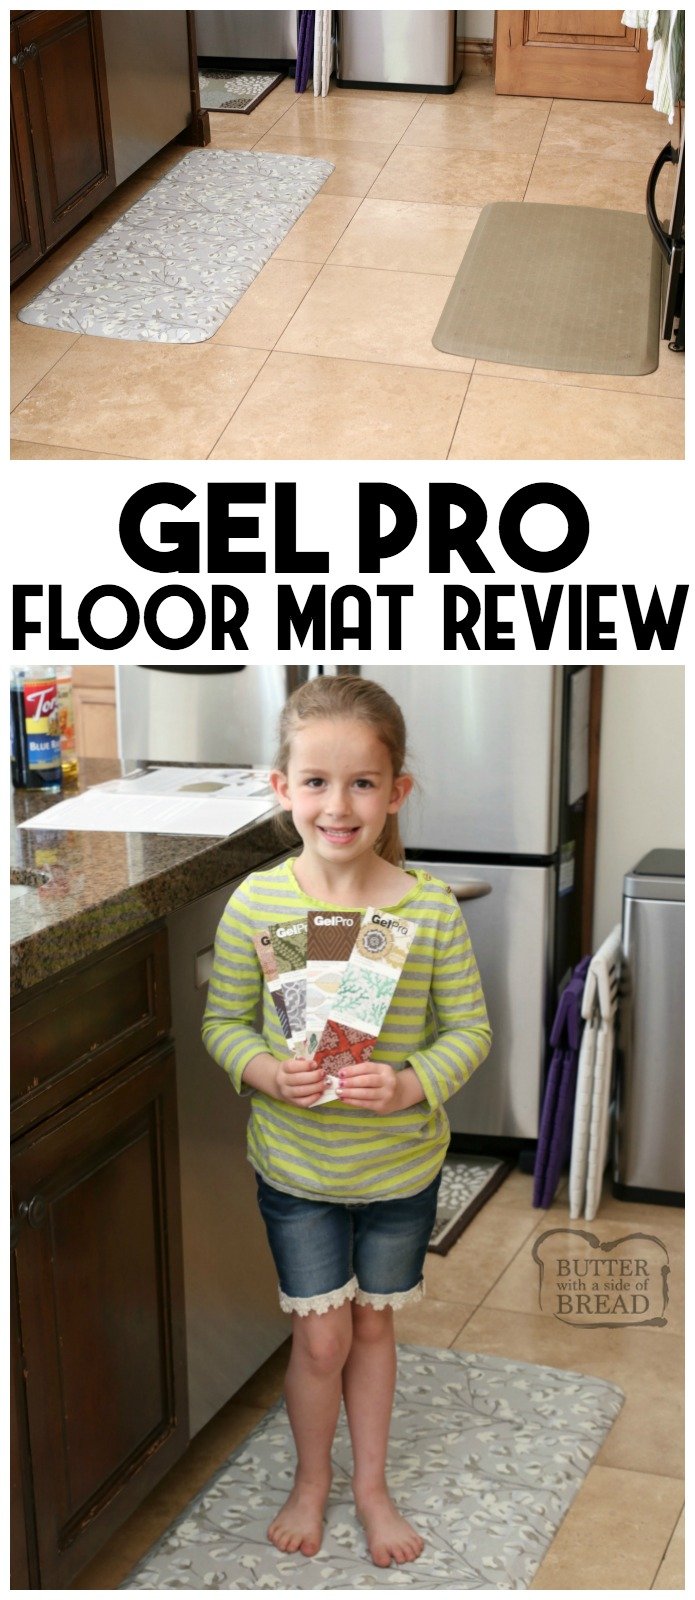 Honest GelPro Elite Floor Mat review, from a busy mom of 5. Why GelPro floor mats are the only and last floor mats you'll ever buy! GelPro floor mats are insanely comfortable, stay-put, durable and so pretty! #GelPro #review #kitchen #floor #floormat